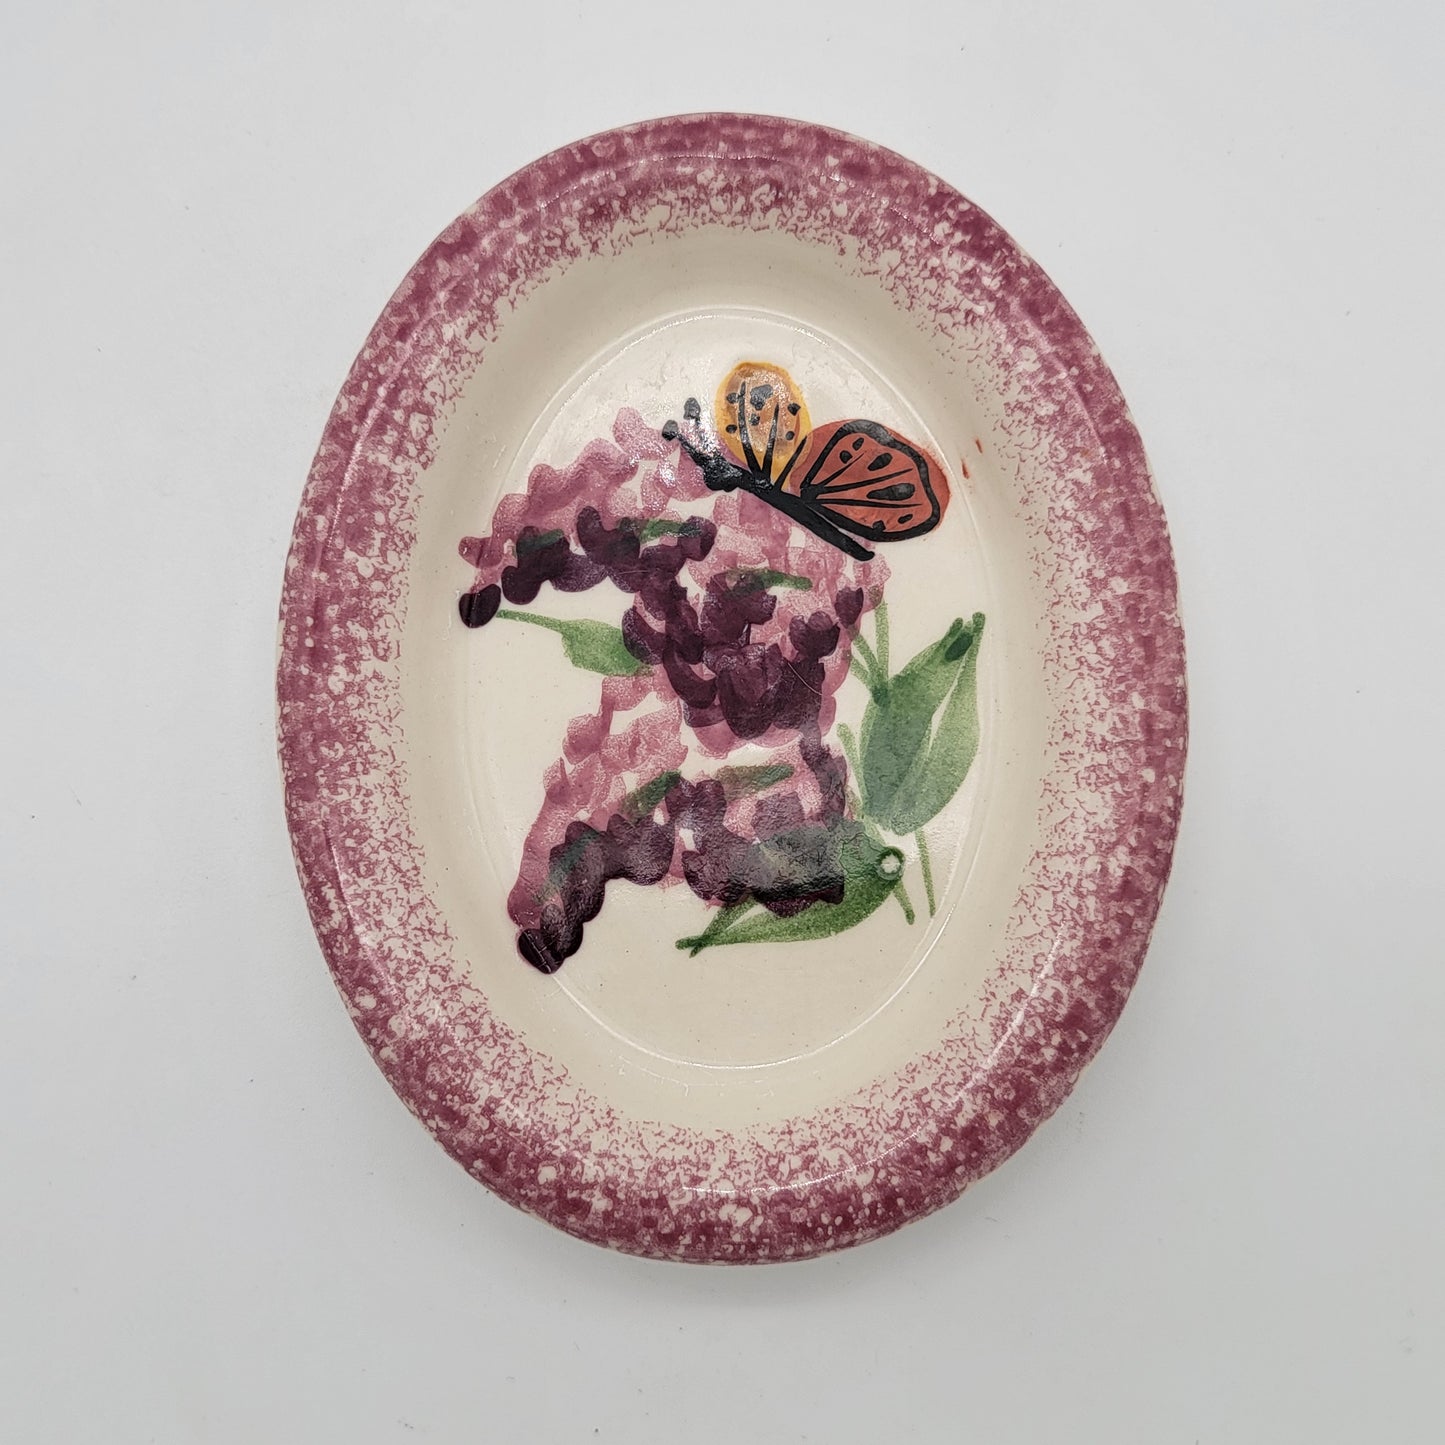 Emerson Creek Pottery Dish with Butterfly